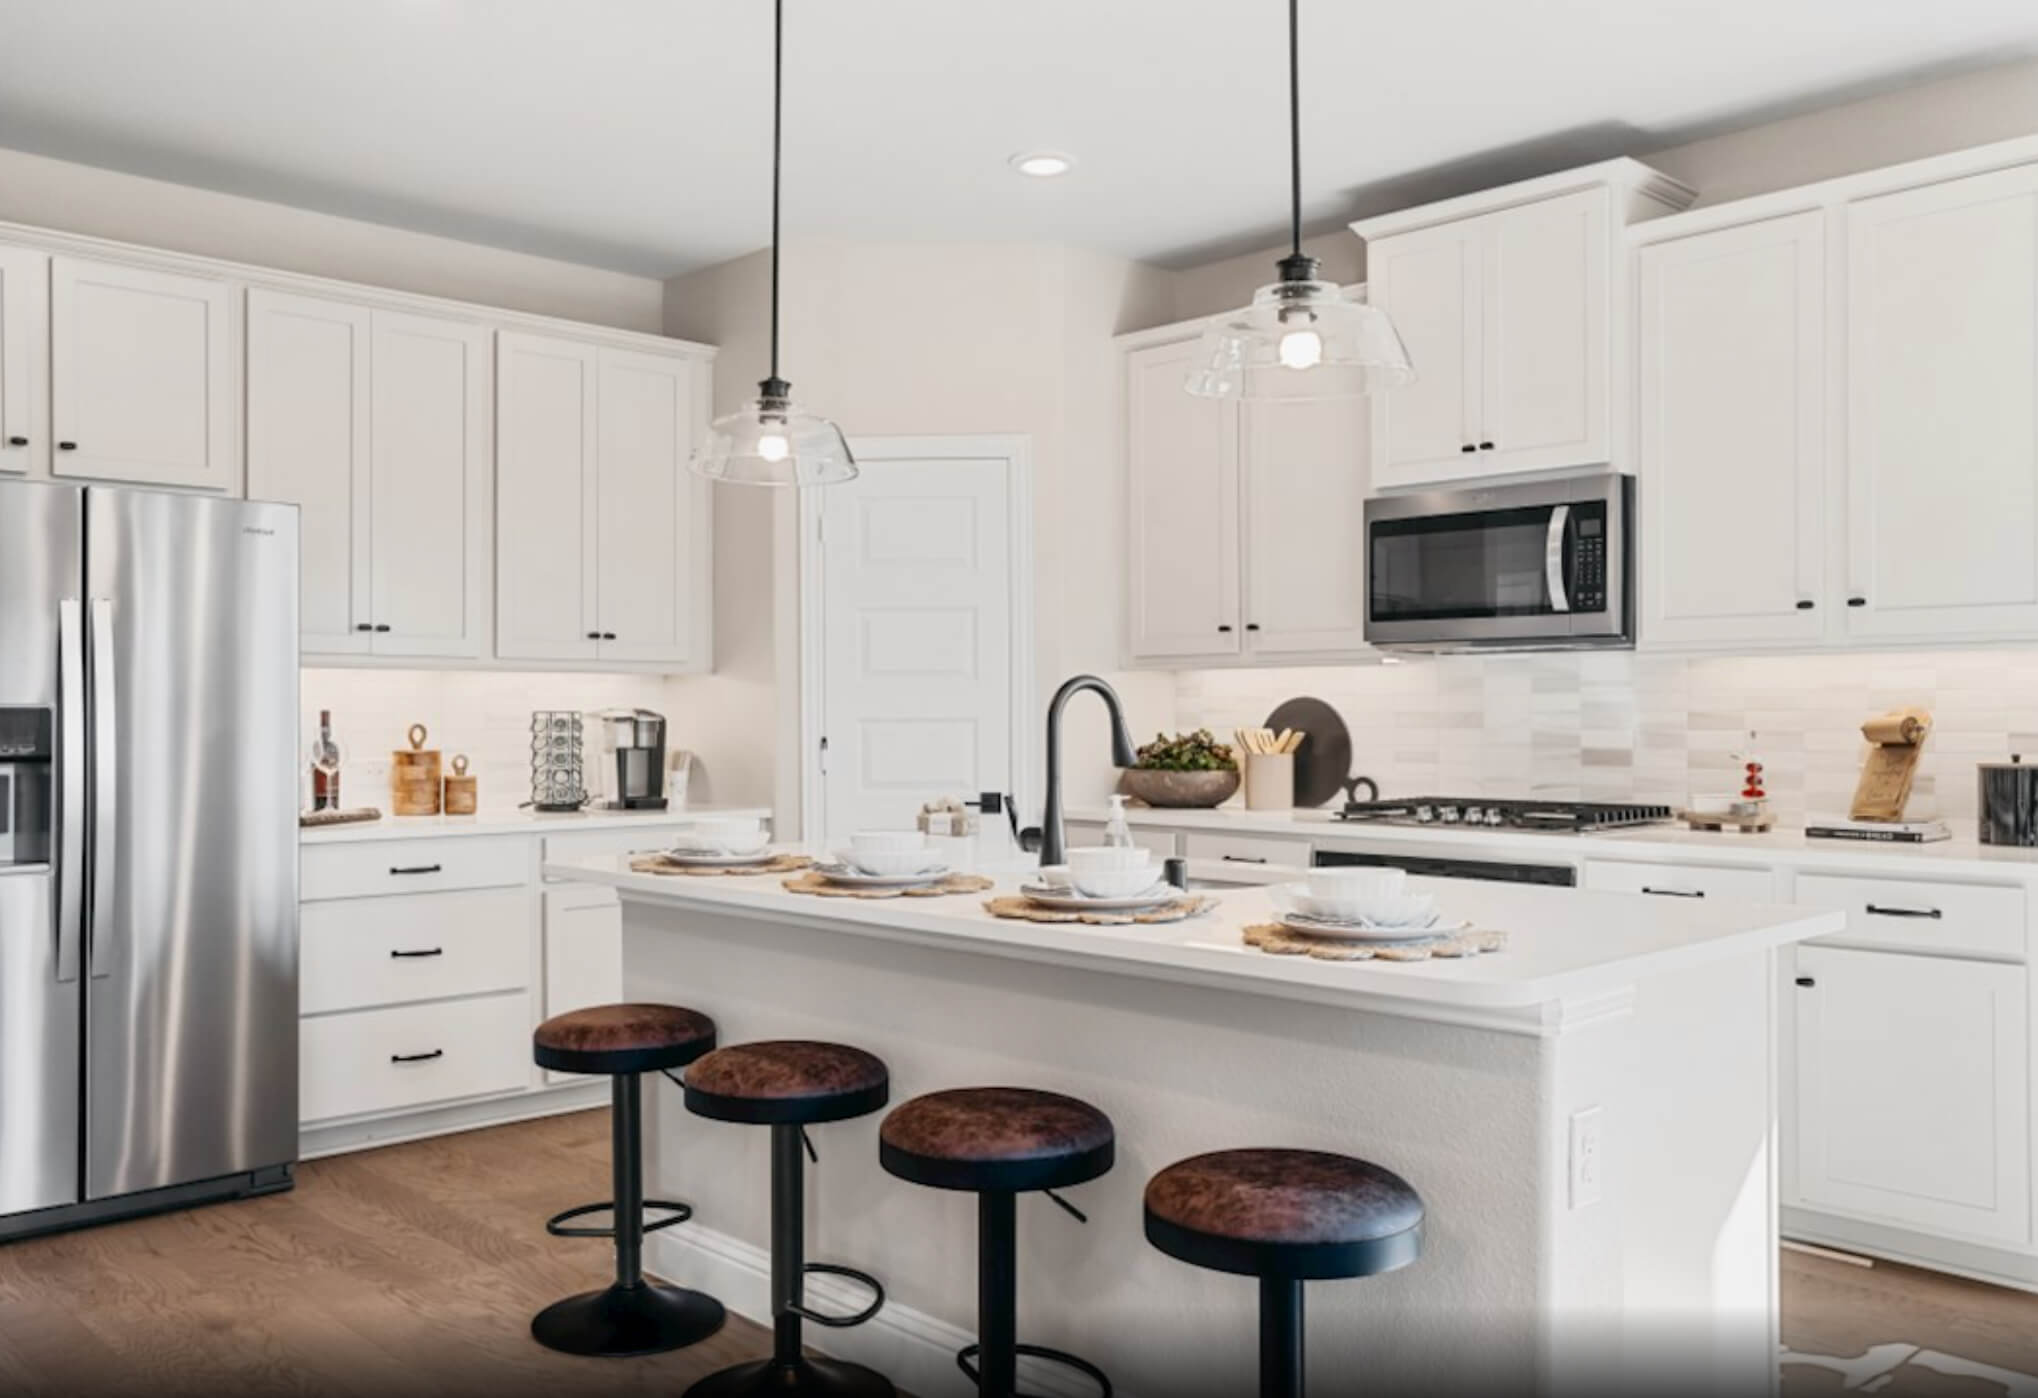 A modern kitchen in new homes in Goodland, TX, with white cabinetry, stainless steel appliances, and a breakfast bar with stools.